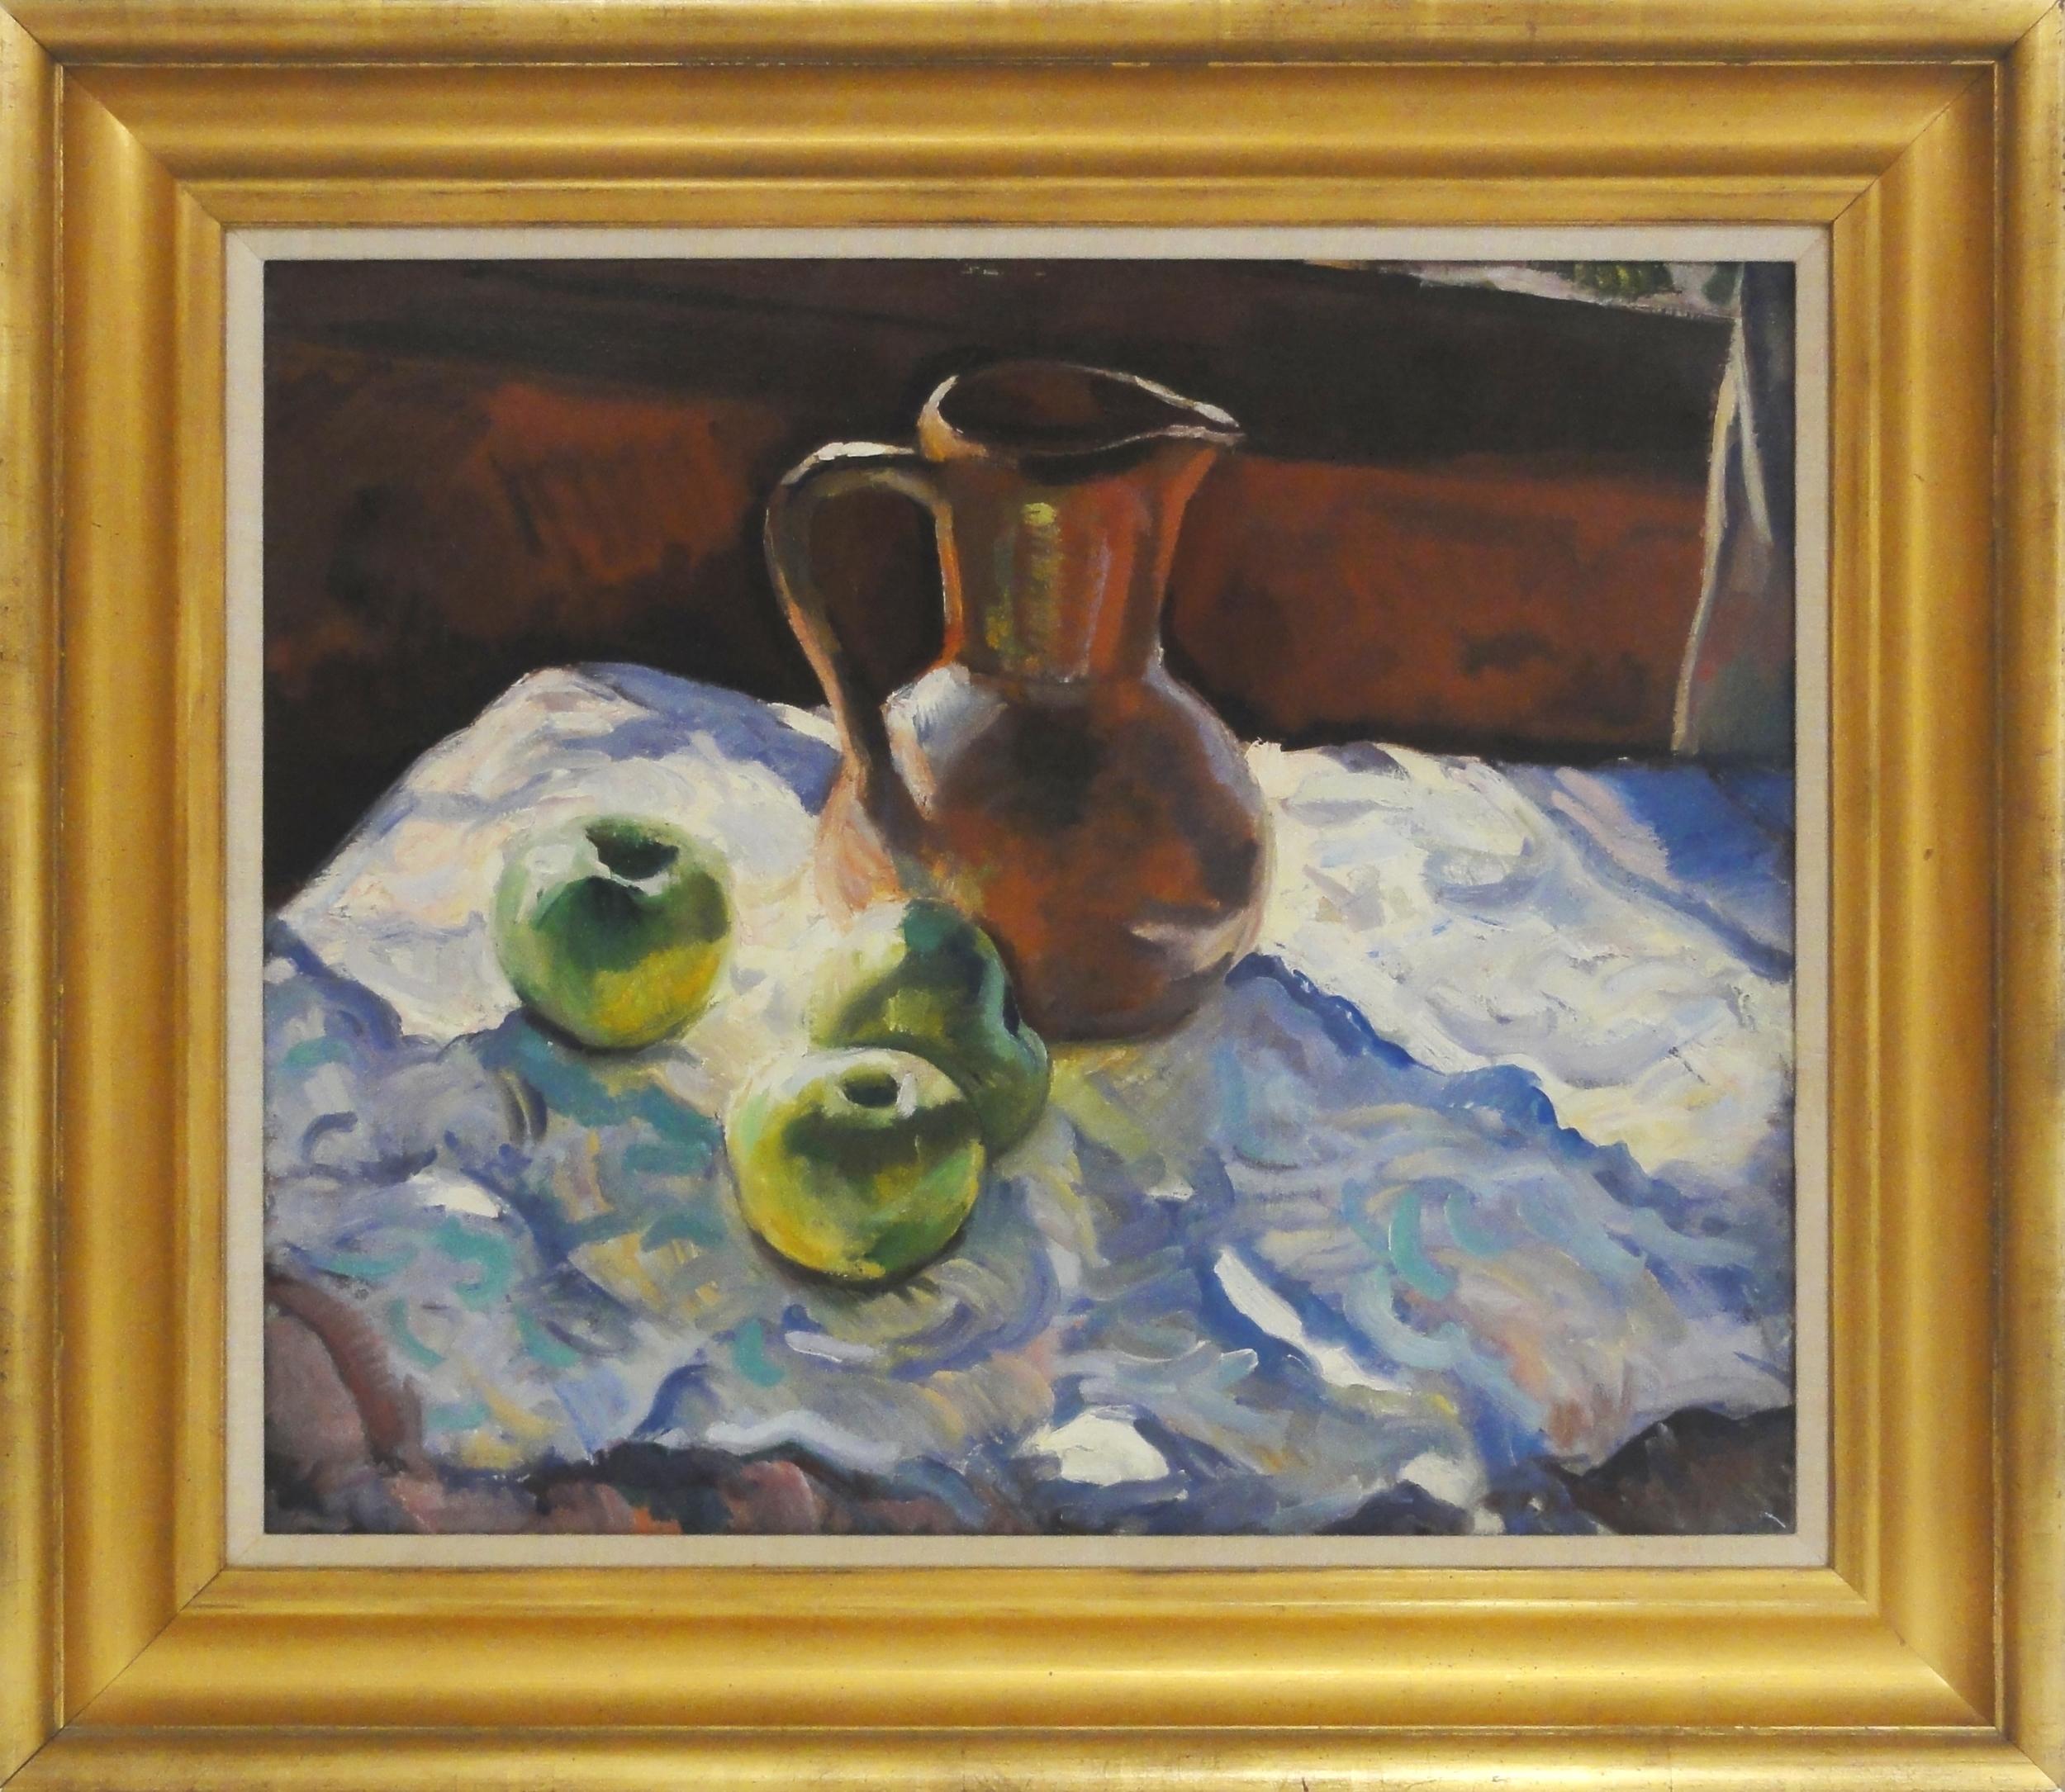 Green Apples - Painting by John E. Weis